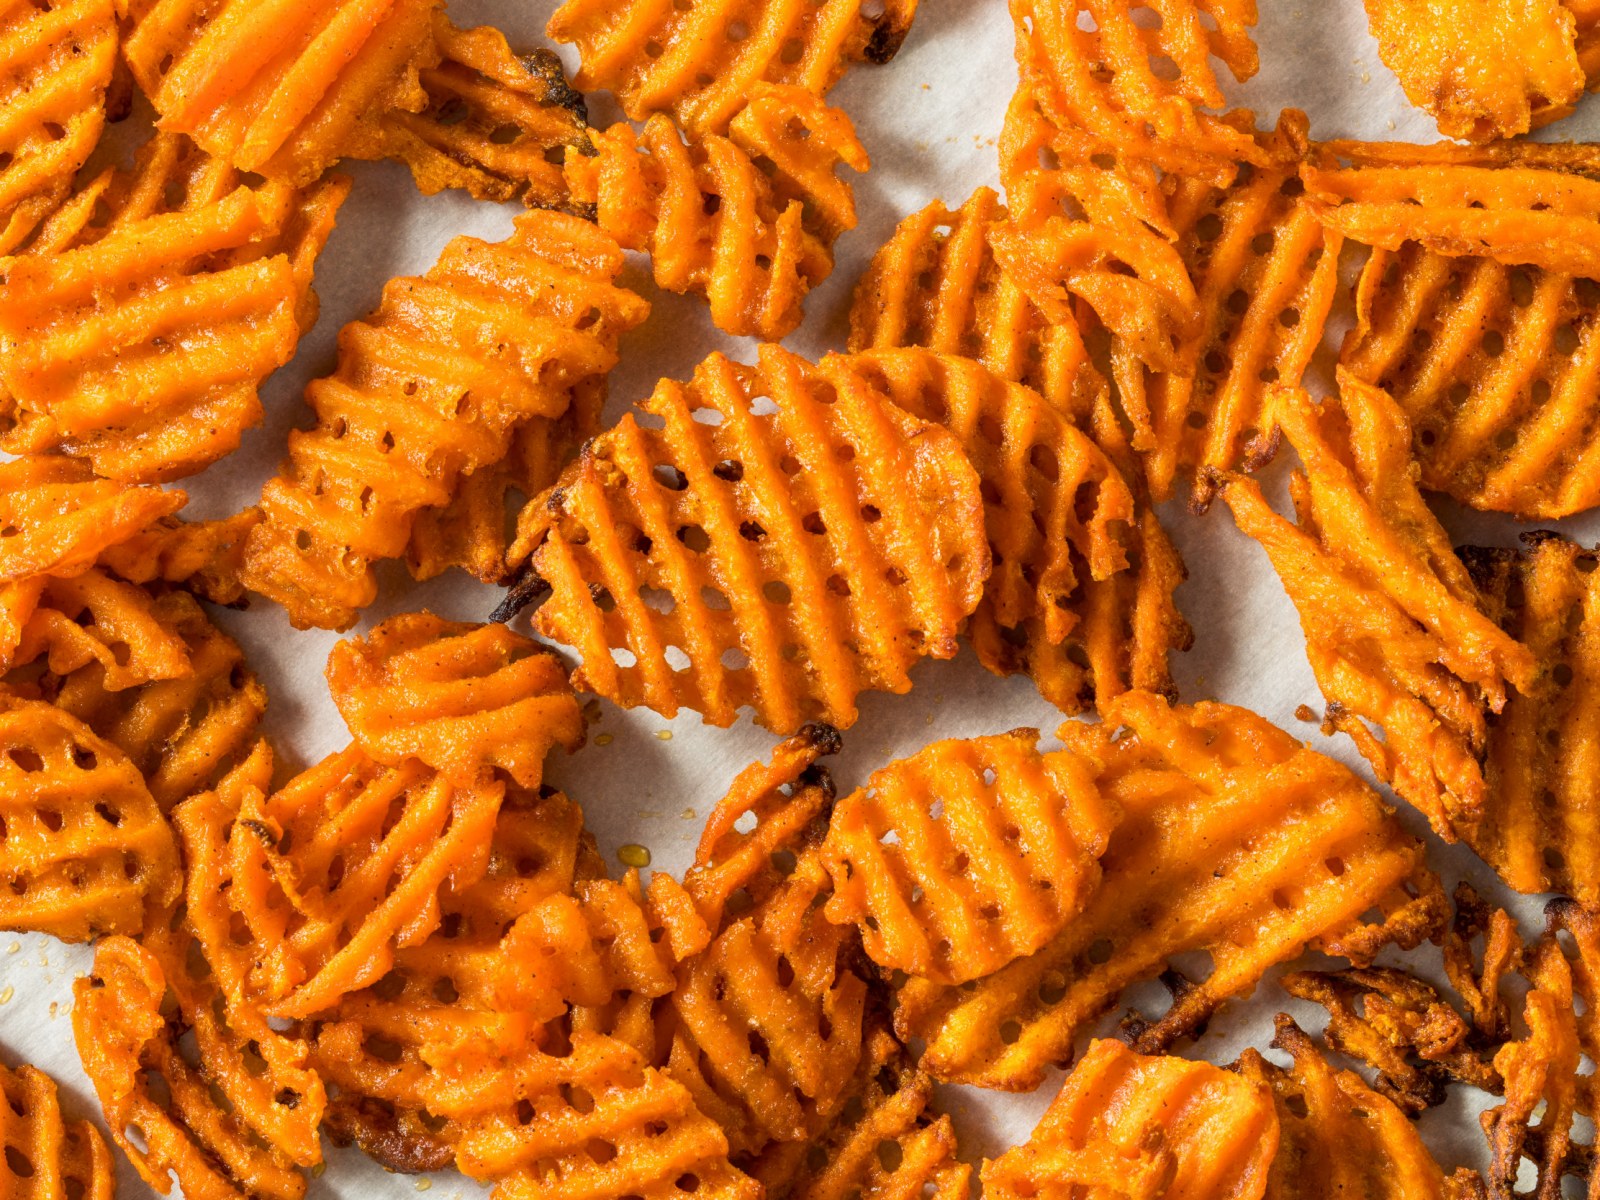 People Are Realizing How Waffle Fries Are Made and It's Blowing